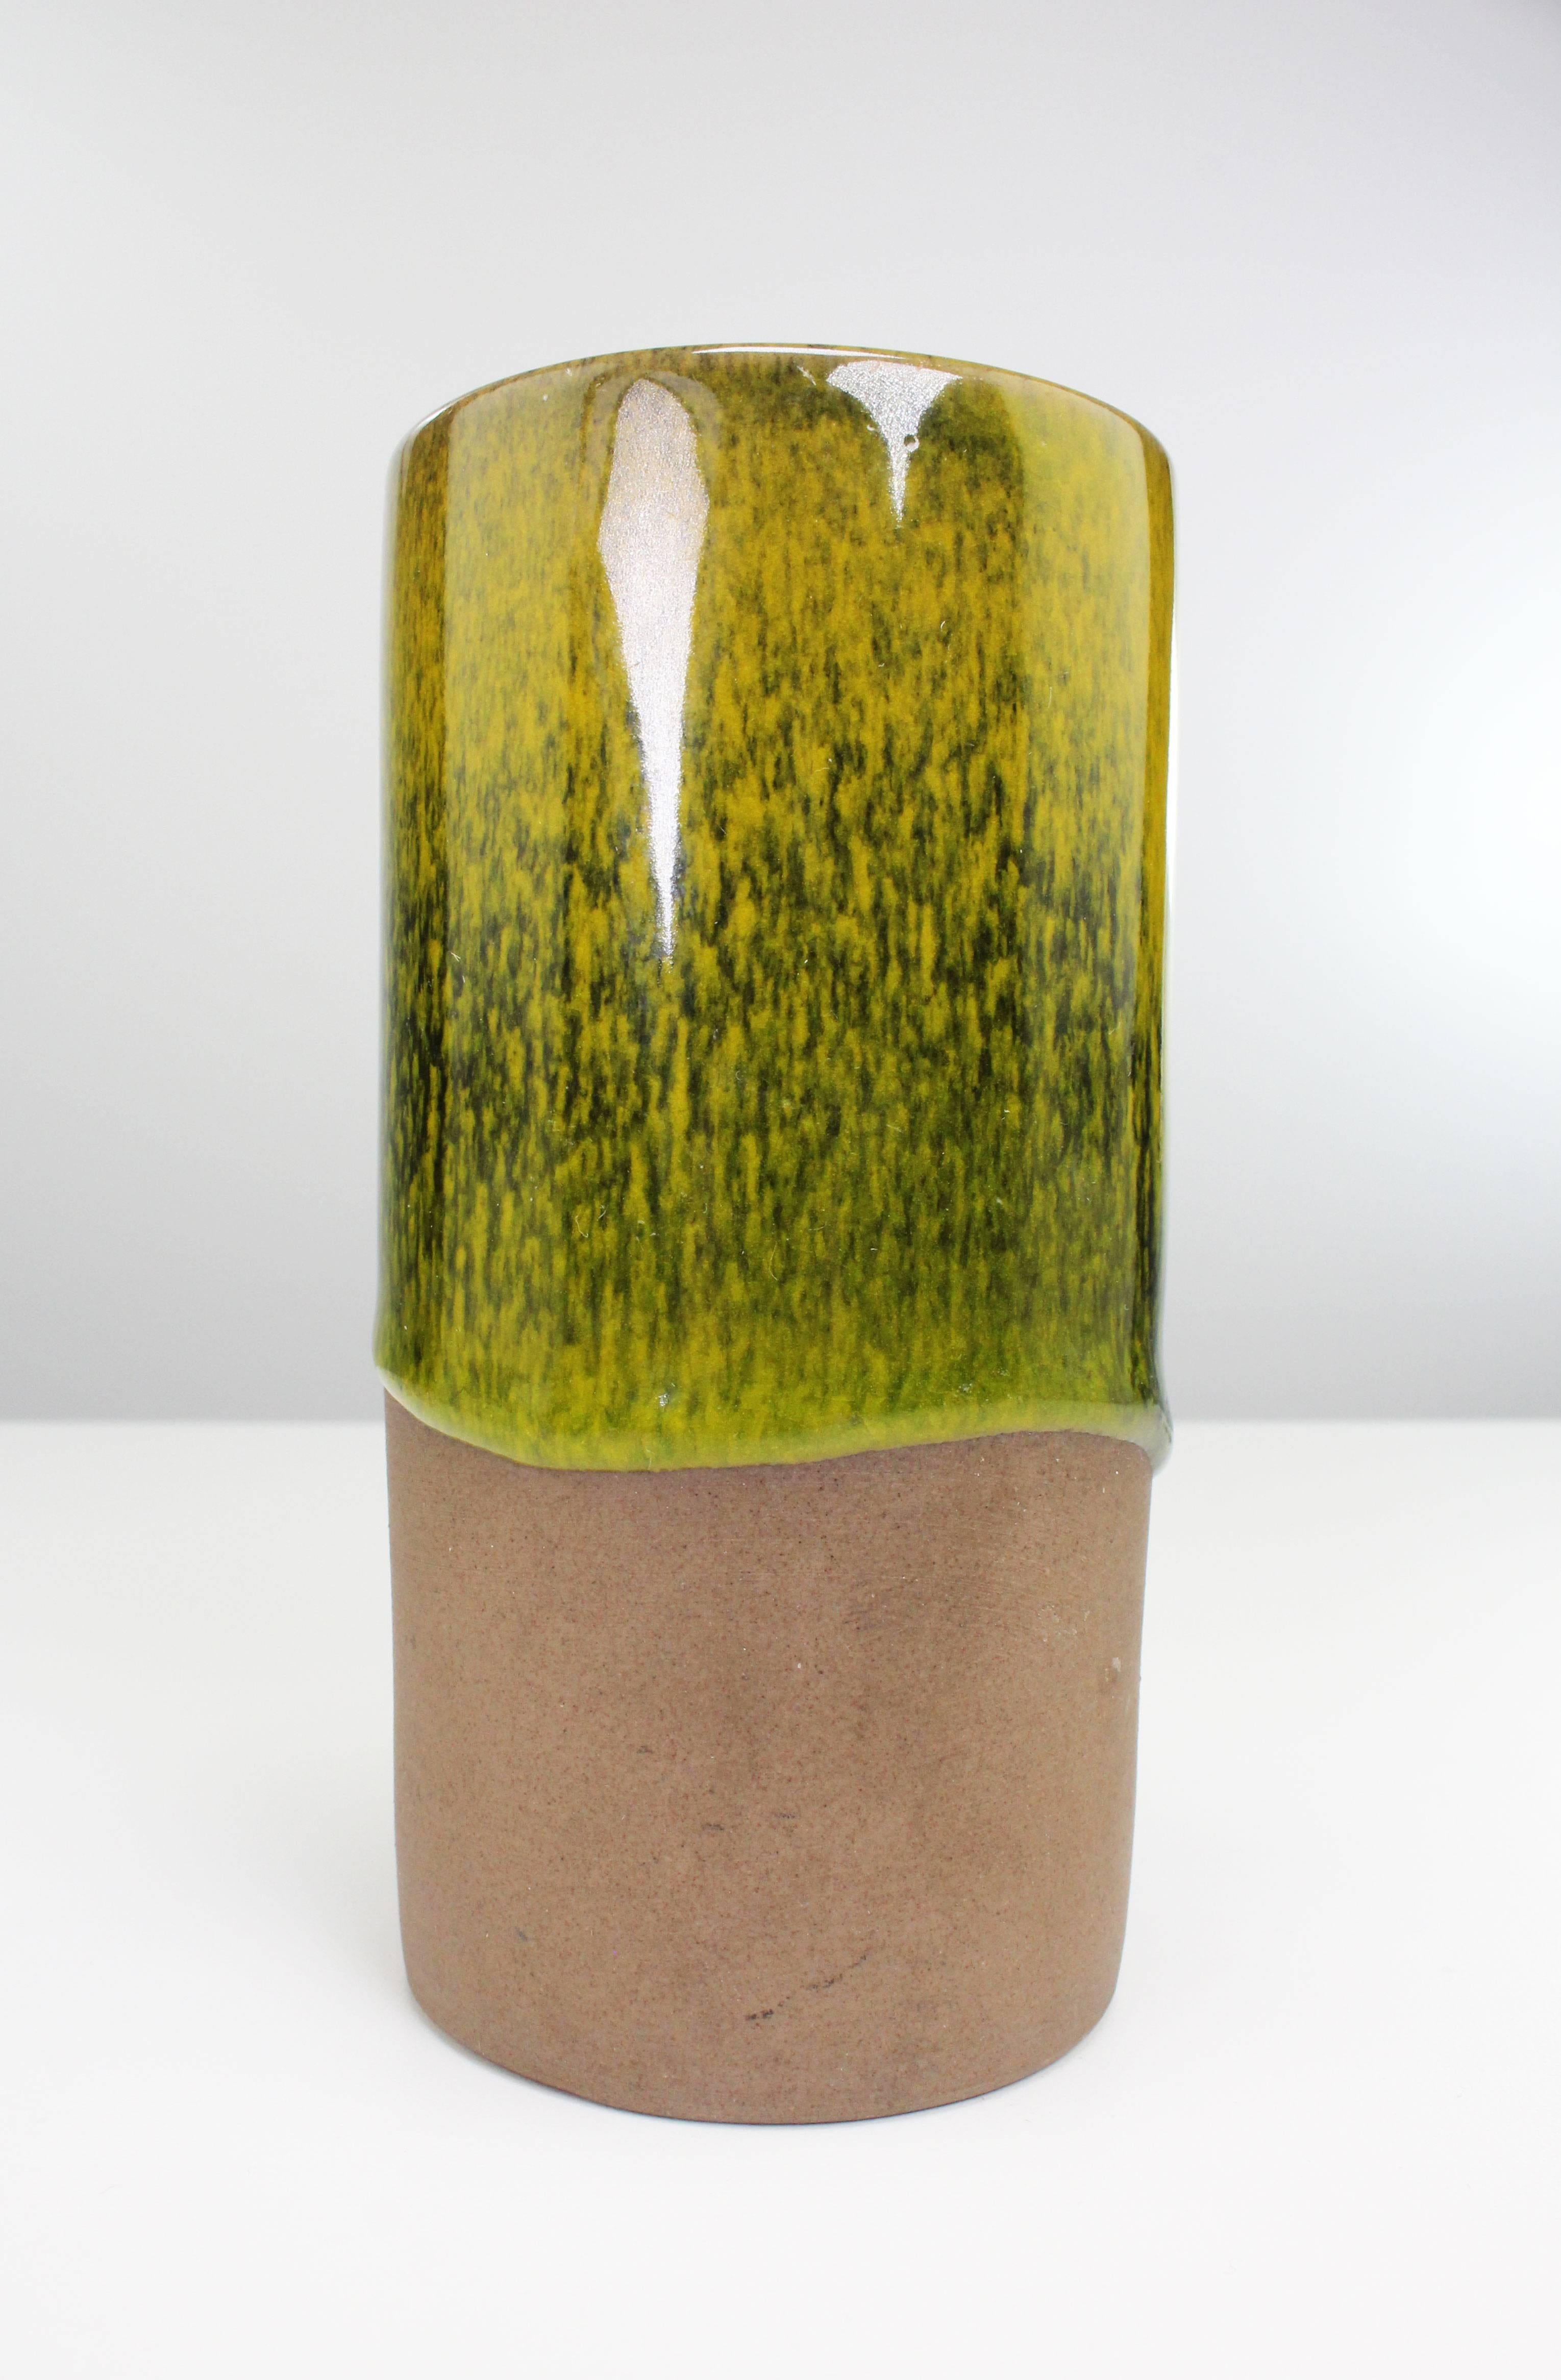 Scandinavian organic modern ceramic vase with smooth green and yellow glaze running down one side by Swedish designer Gunnar Nylund for Danish Nymølle Keramiske Fabrik in the 1960s. Stamped under base. Beautiful vintage condition.